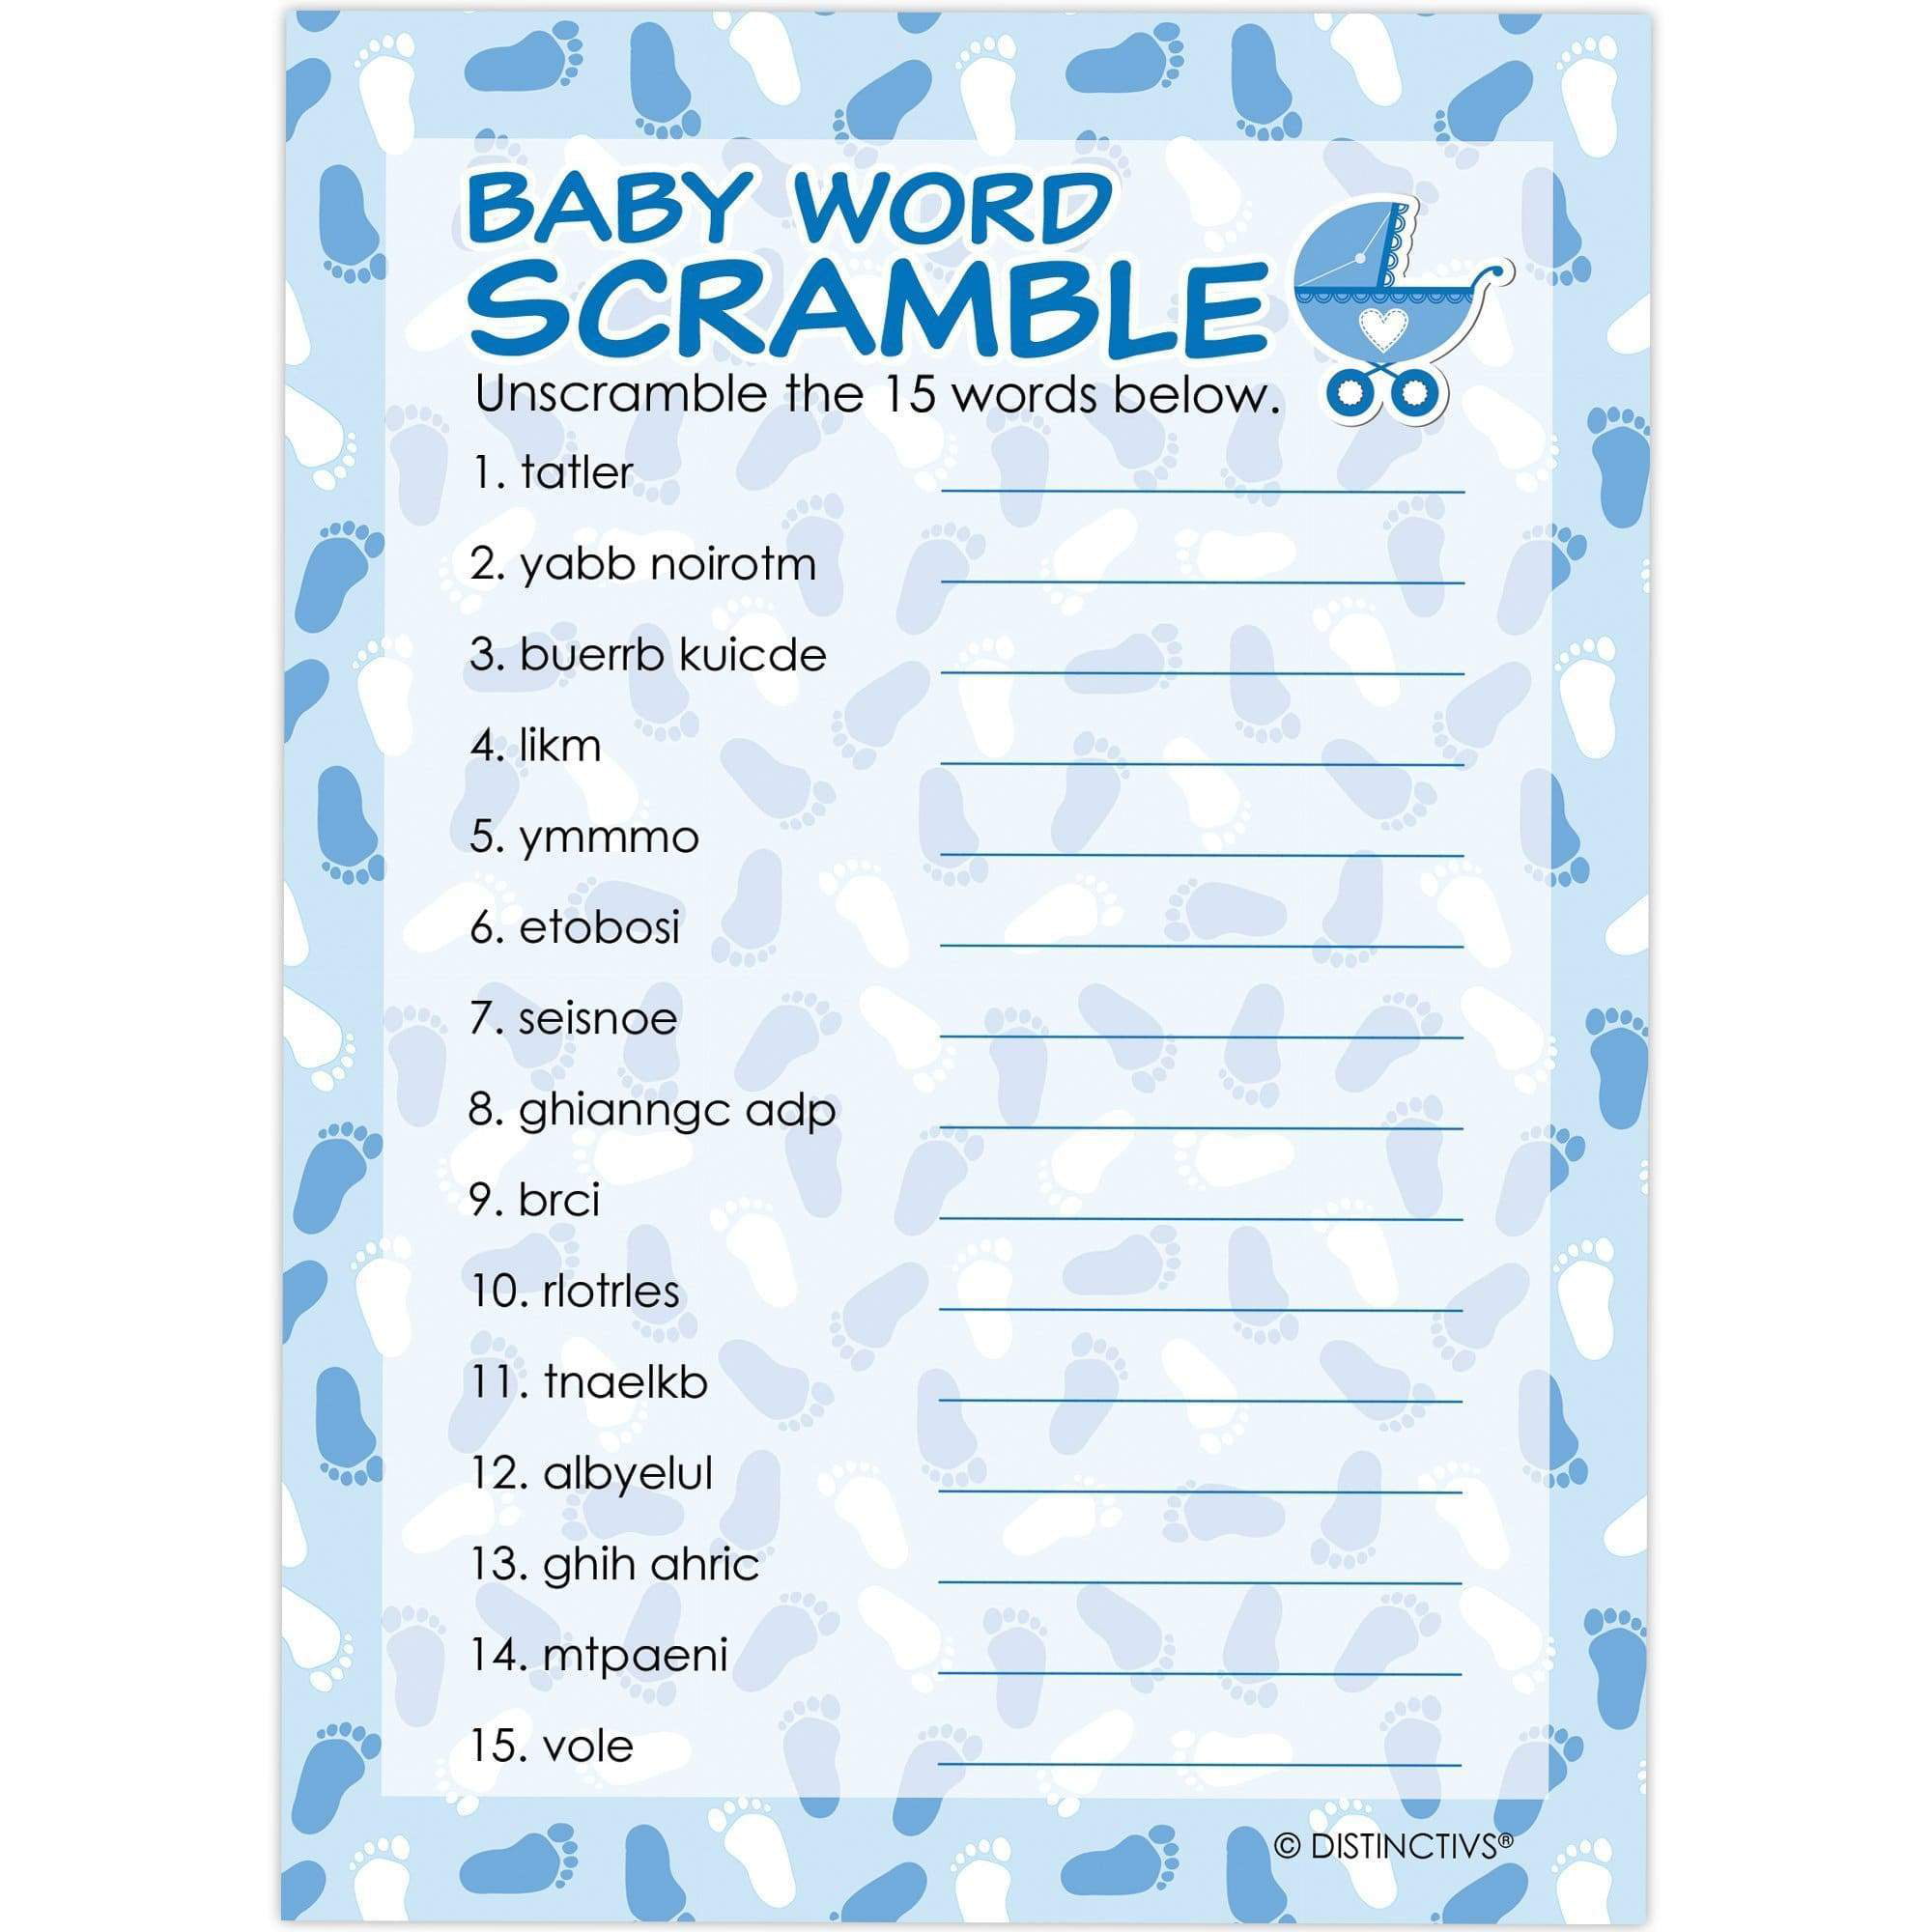 Boy Girl Neutral Unisex Fun Baby Shower Word SCRAMBLE Game 16 A6 Party Cards 